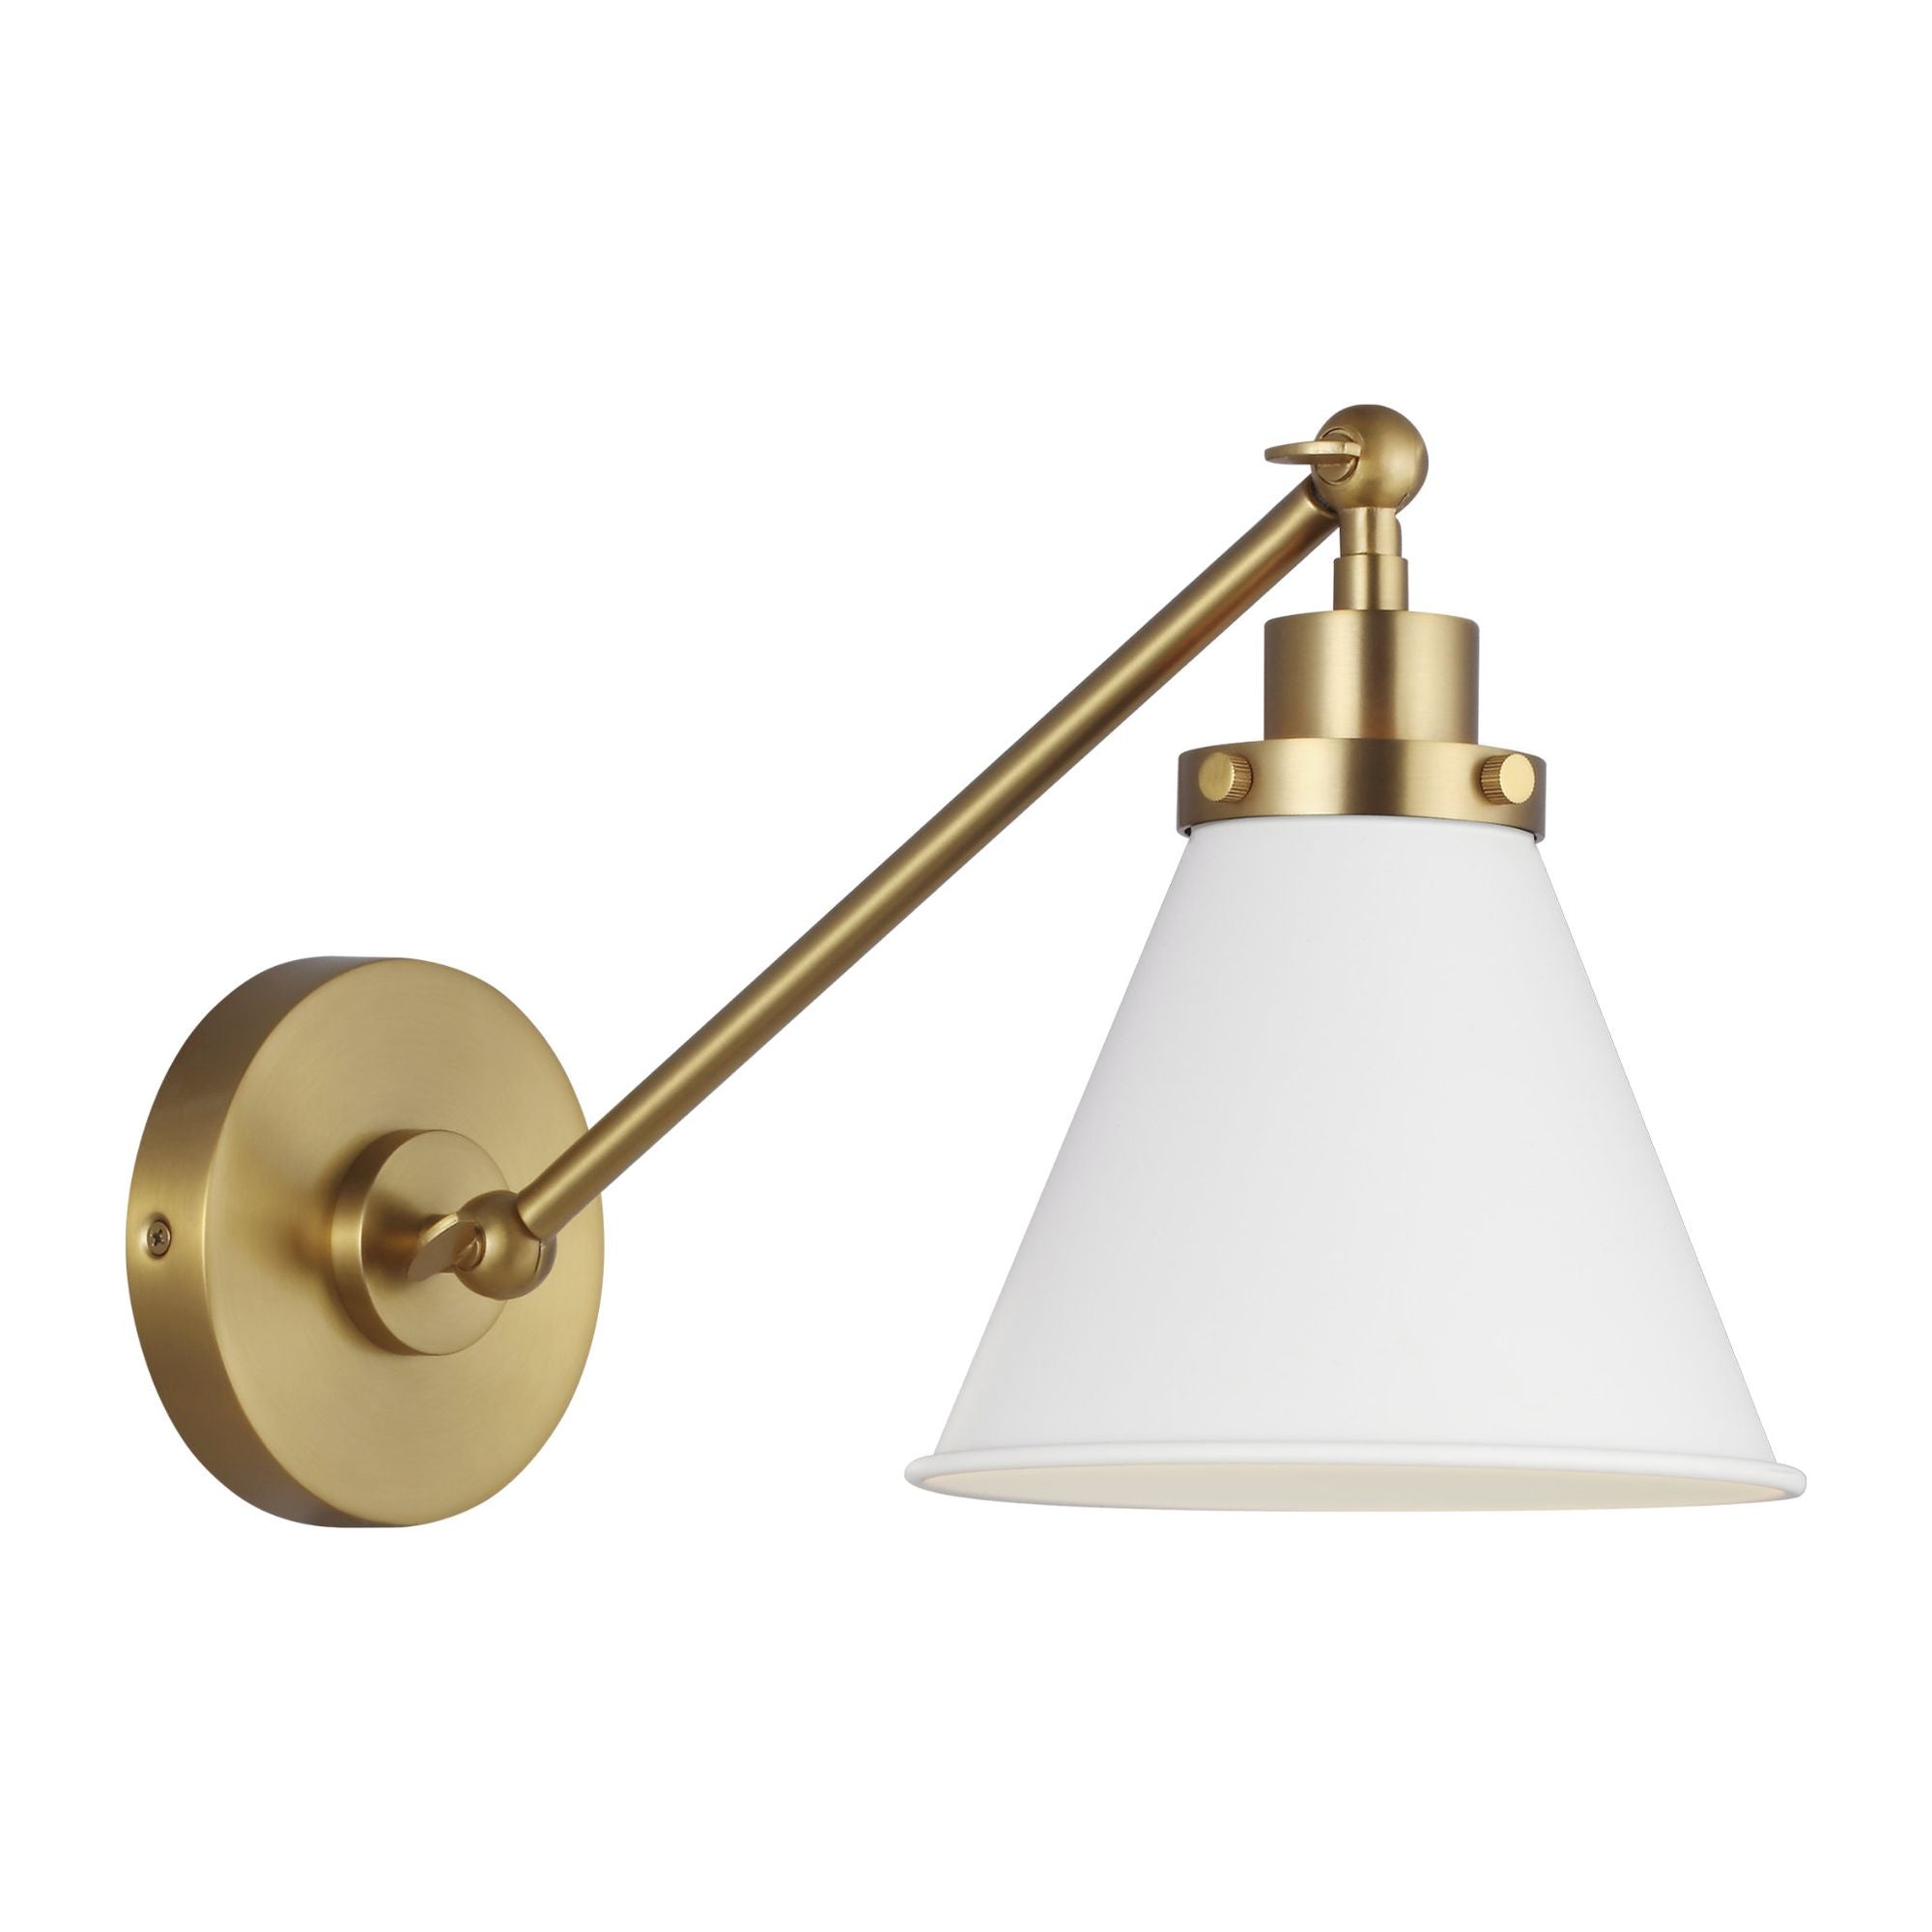 Chapman & Myers Wellfleet Single Arm Cone Task Sconce in Matte White and Burnished Brass